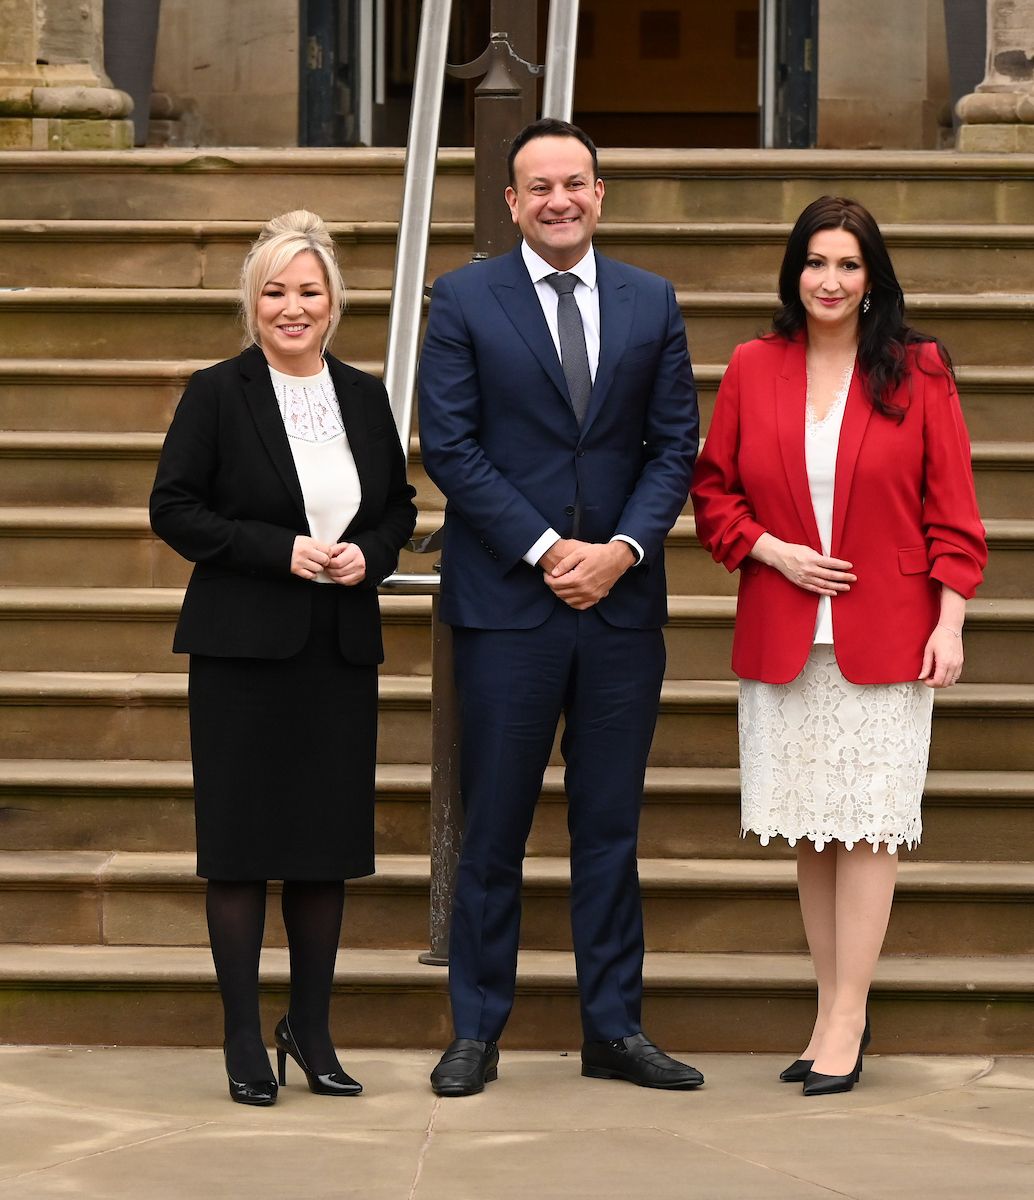 HISTORIC: Taoiseach Leo Varadkar is welcomed to Stormont by First Minister Michelle O\'Neill and deputy First Minister Emma Little-Pengelly